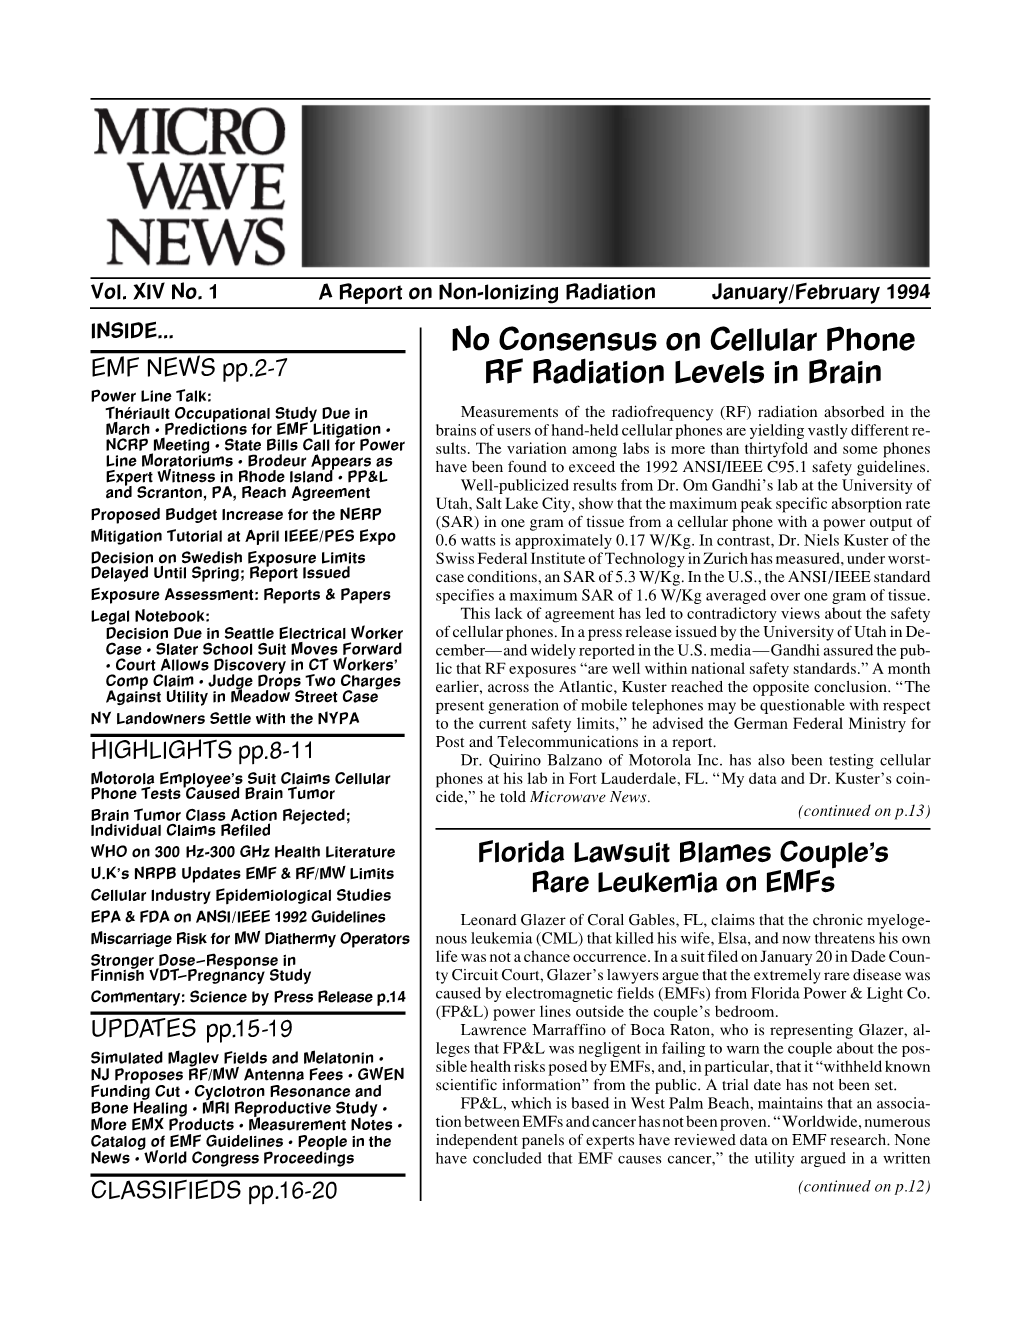 No Consensus on Cellular Phone RF Radiation Levels in Brain (Continued from P.1)